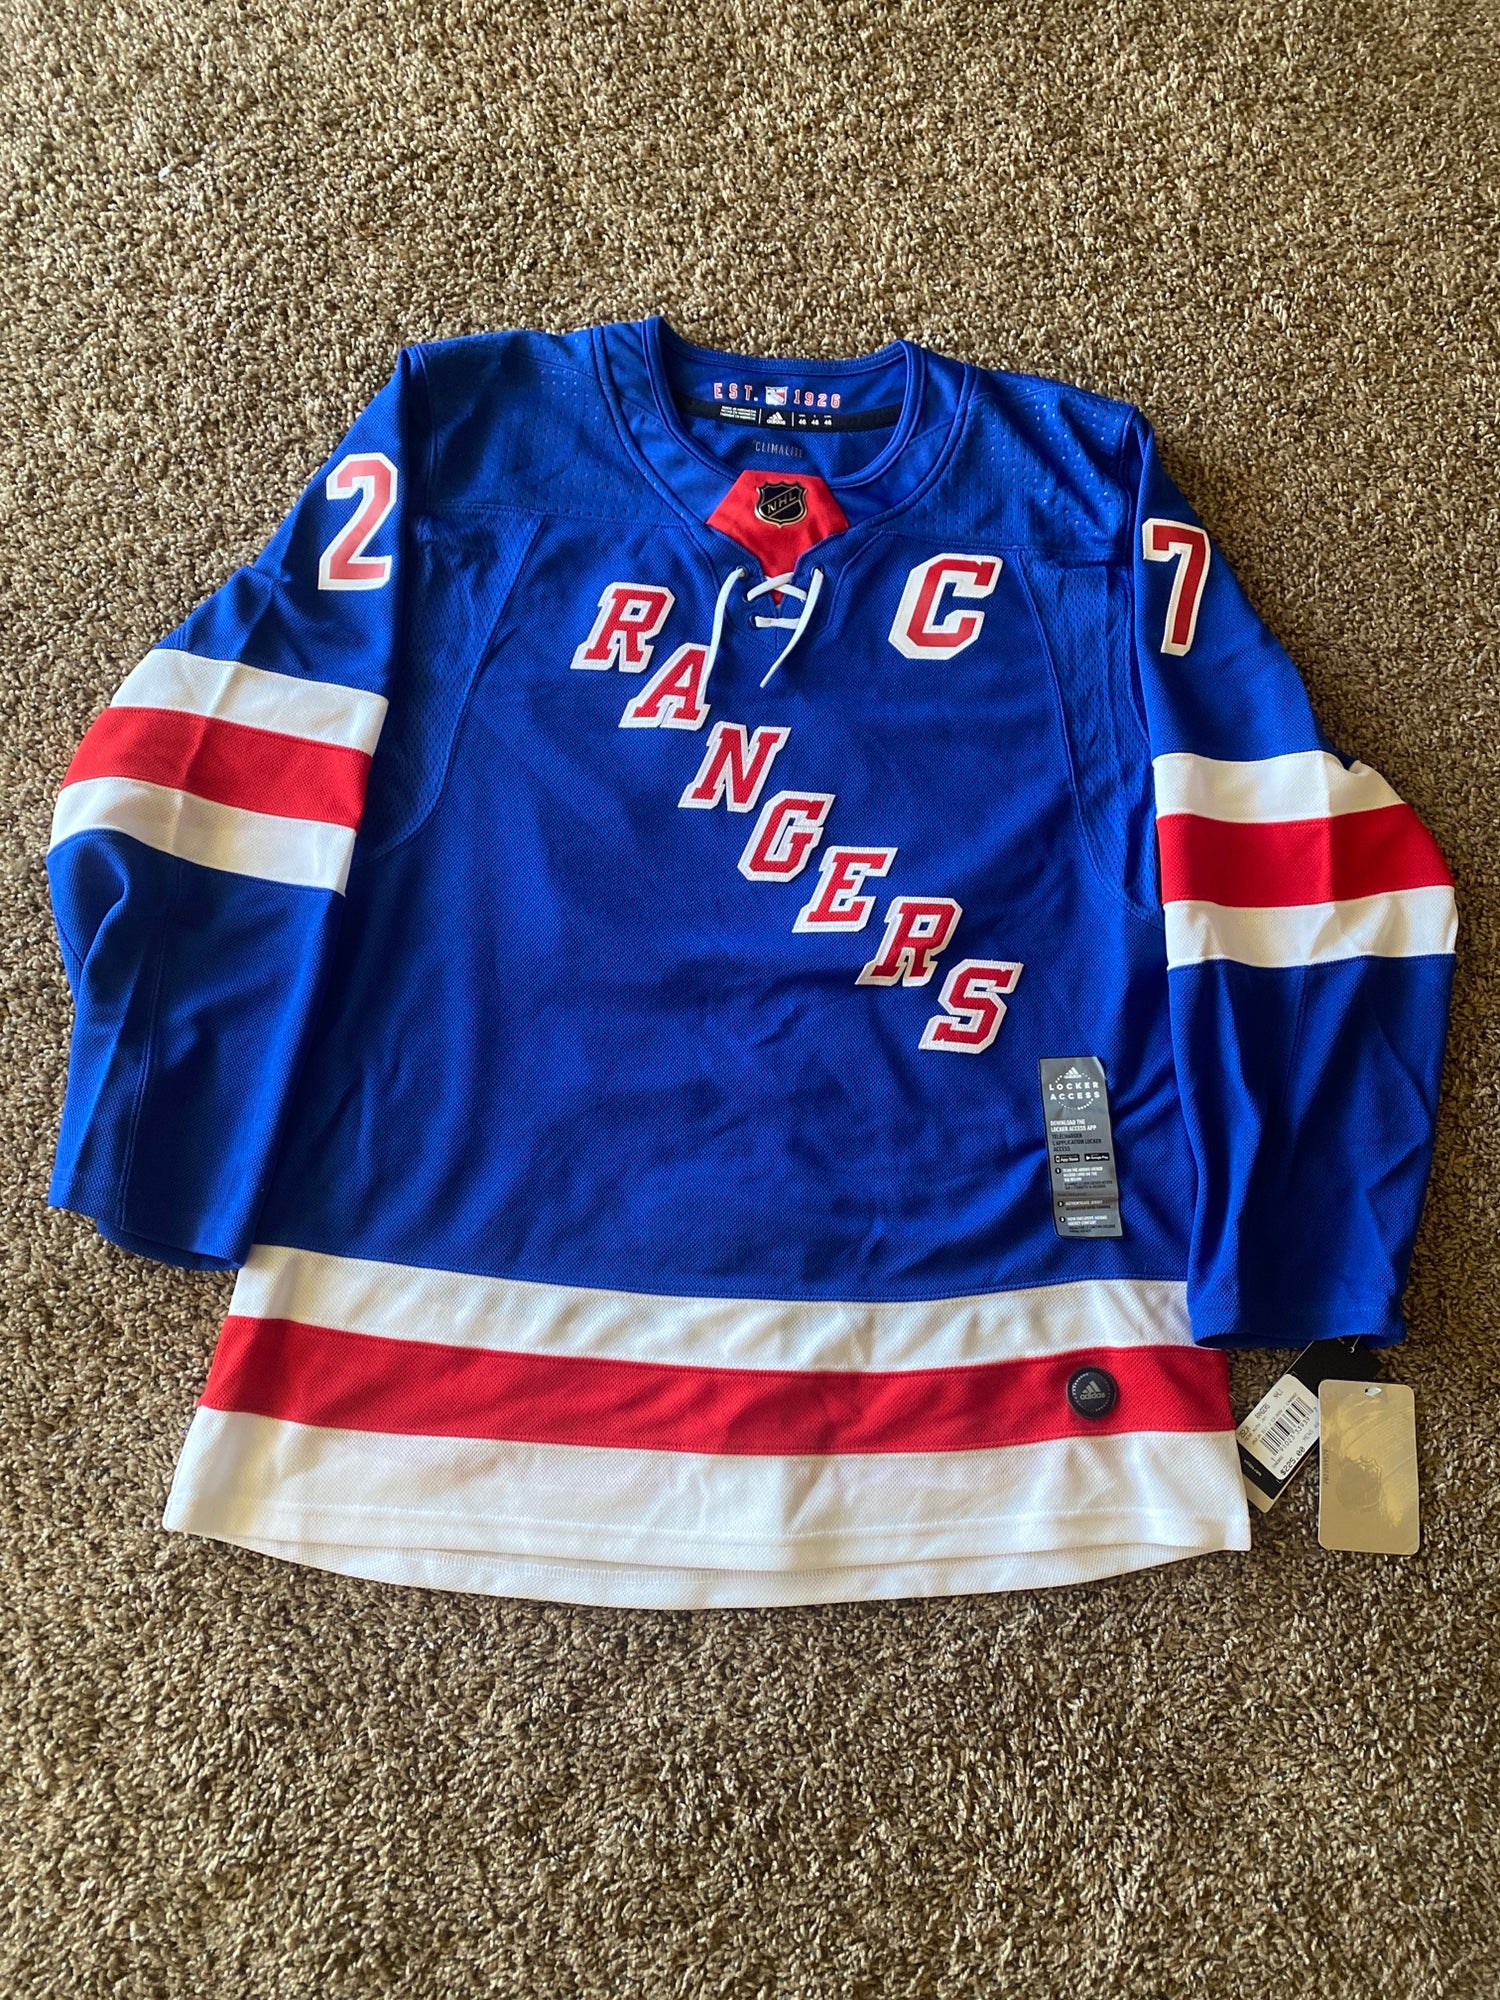 New York Rangers Jerseys | New, Preowned, and Vintage